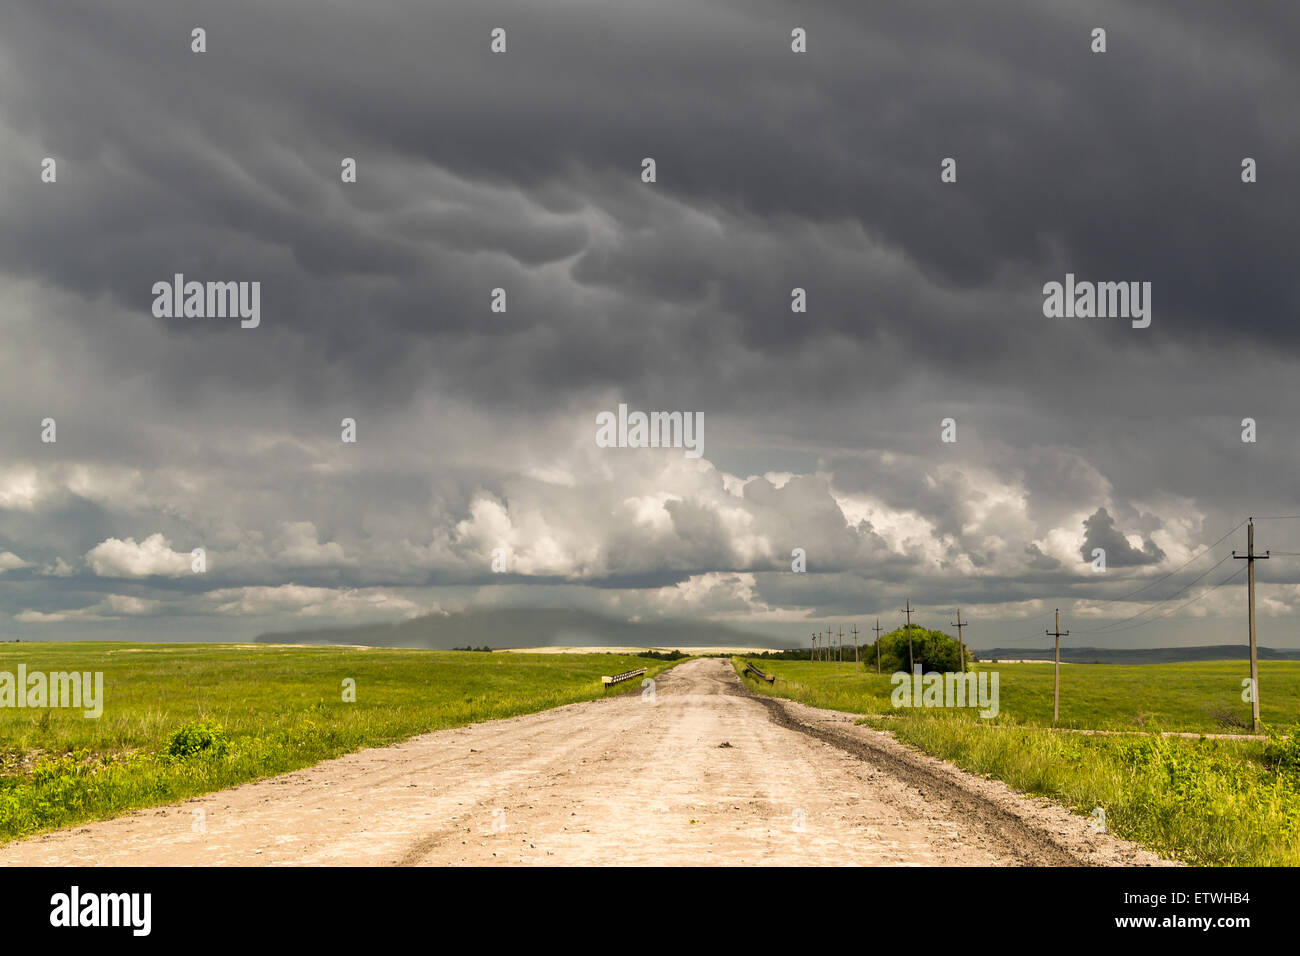 Solitary dirt track leads to the horizon as dark rain clouds gather overhead Stock Photo